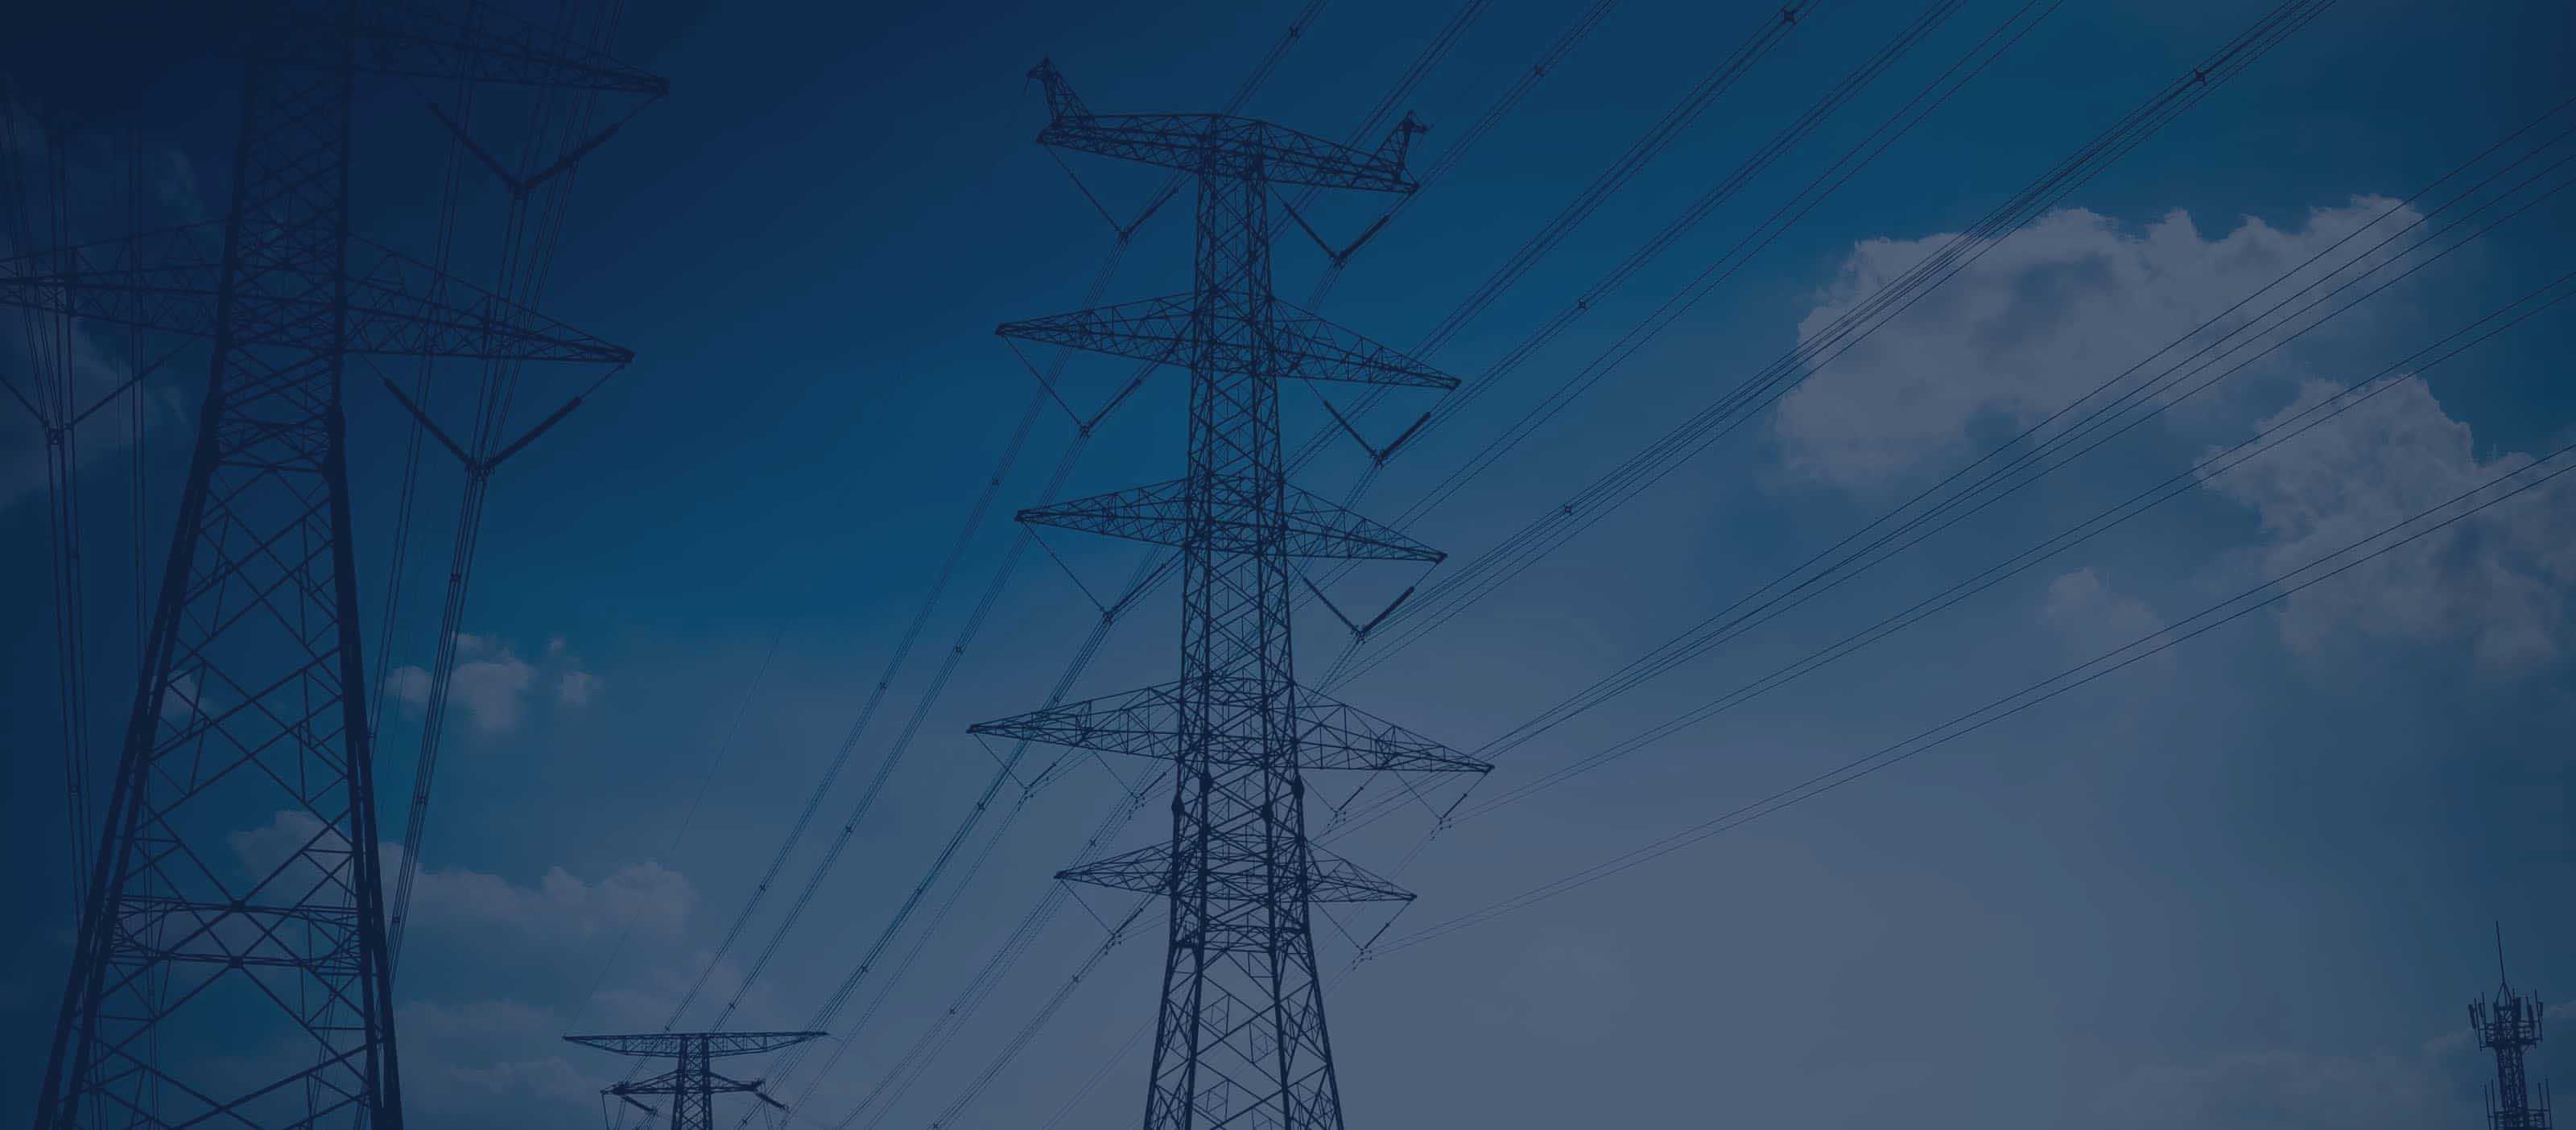 AEMS solutions for utilities | GE Digital software for Grid